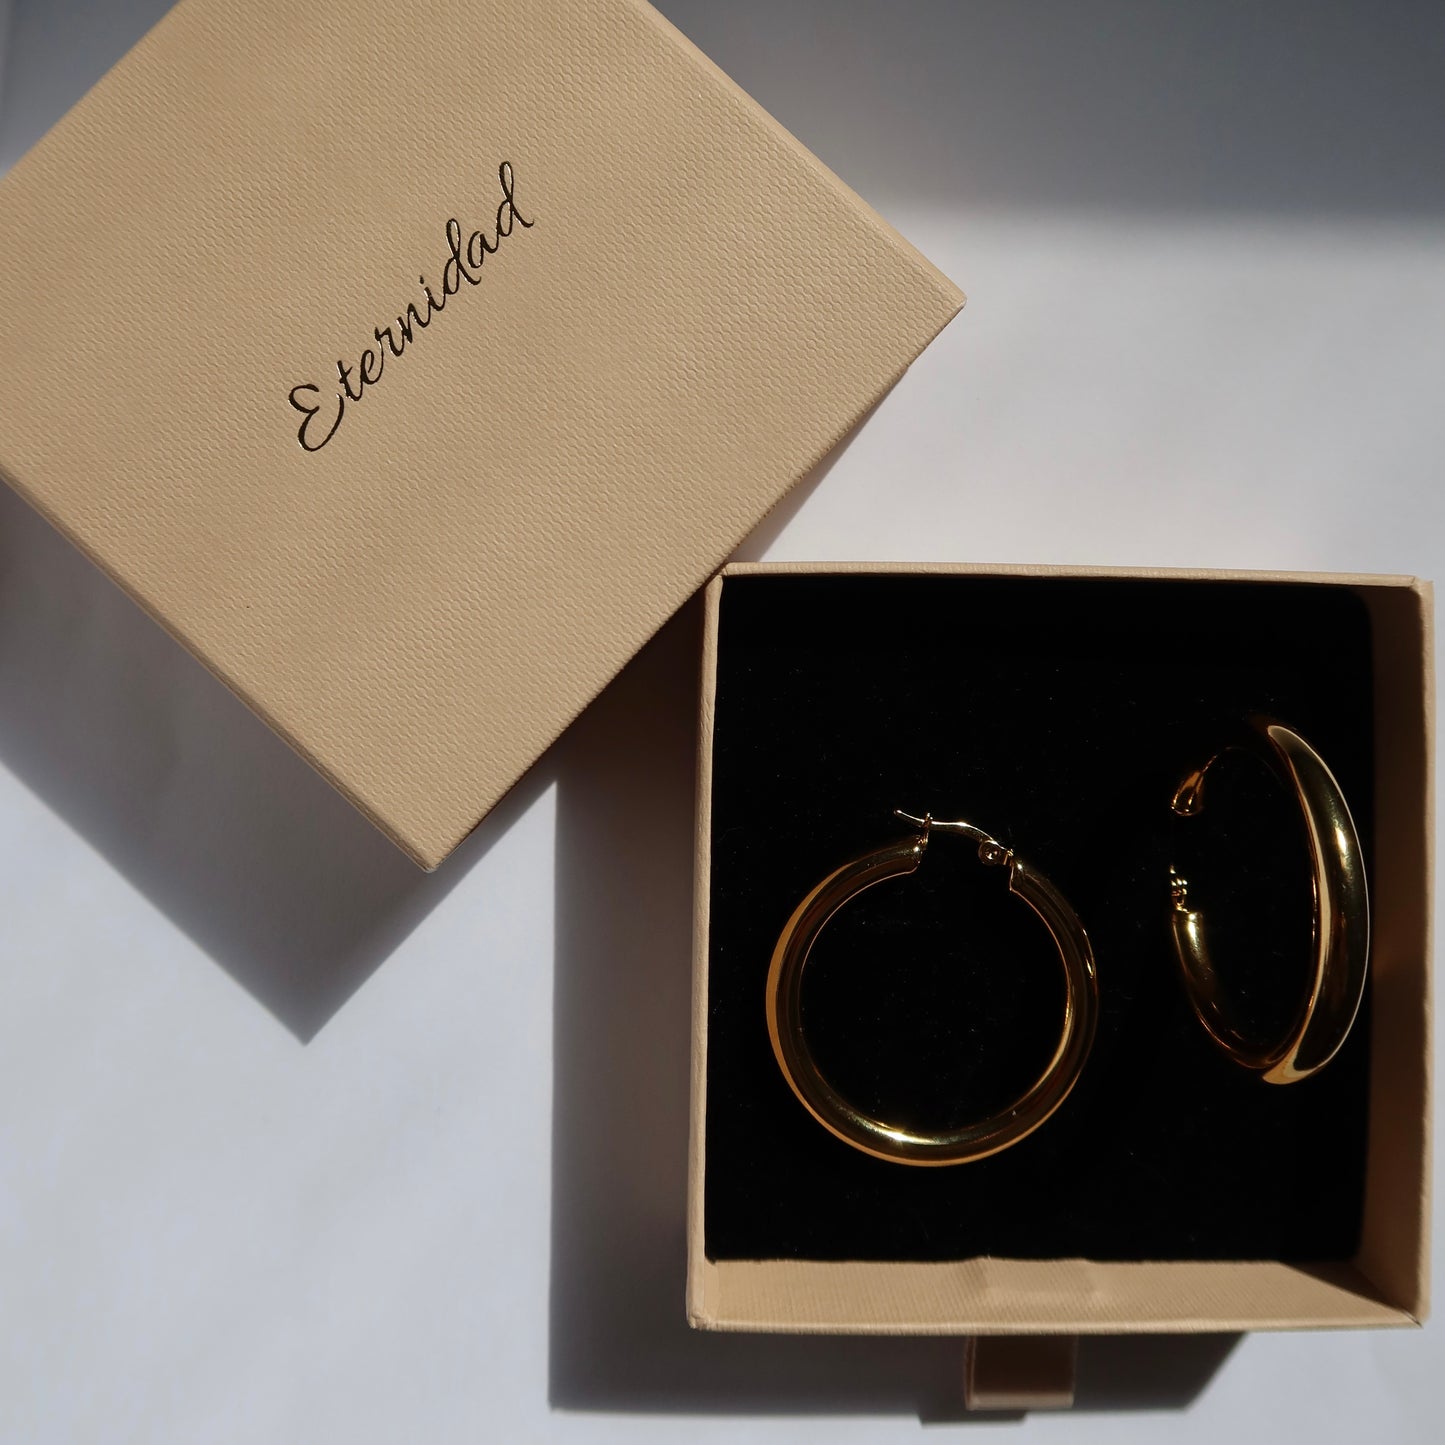 Gold plated hoop earrings in eco-friendly jewelry box Hoop earrings from ShopEternidad.com Affordable 18K Gold Plated Jewelry